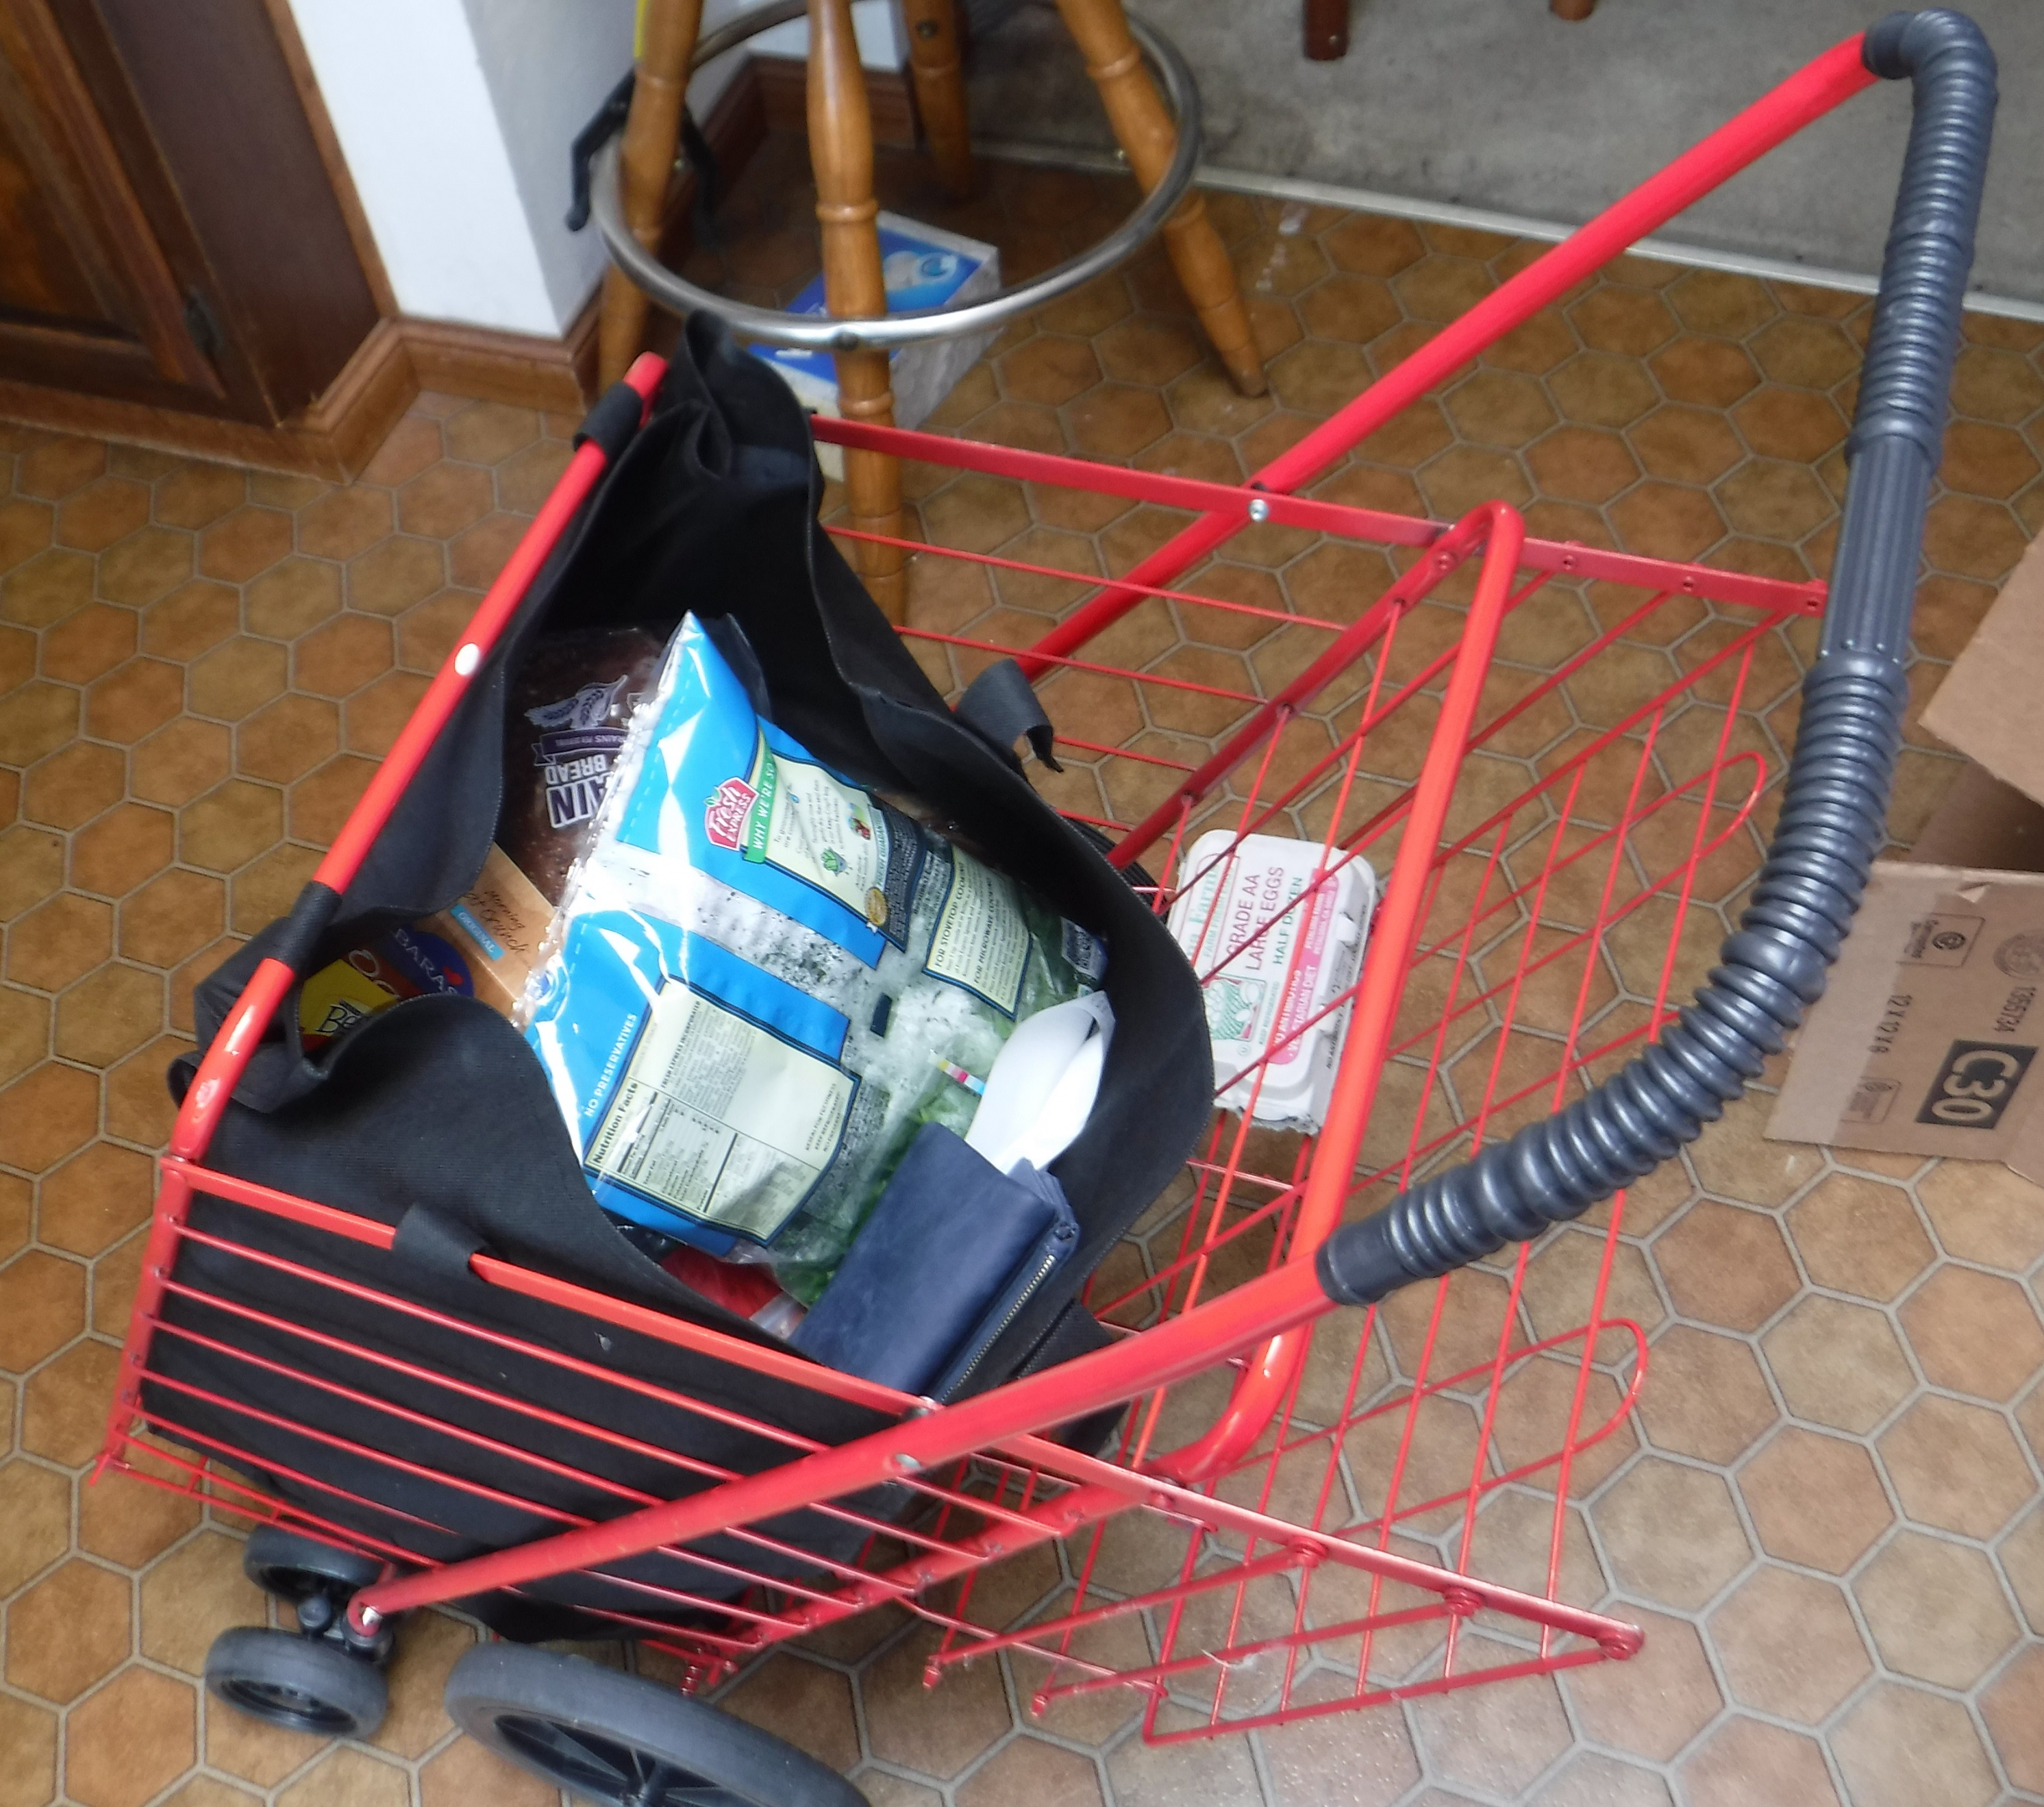 Photo I took of my personal shopping cart when I once came home from shopping